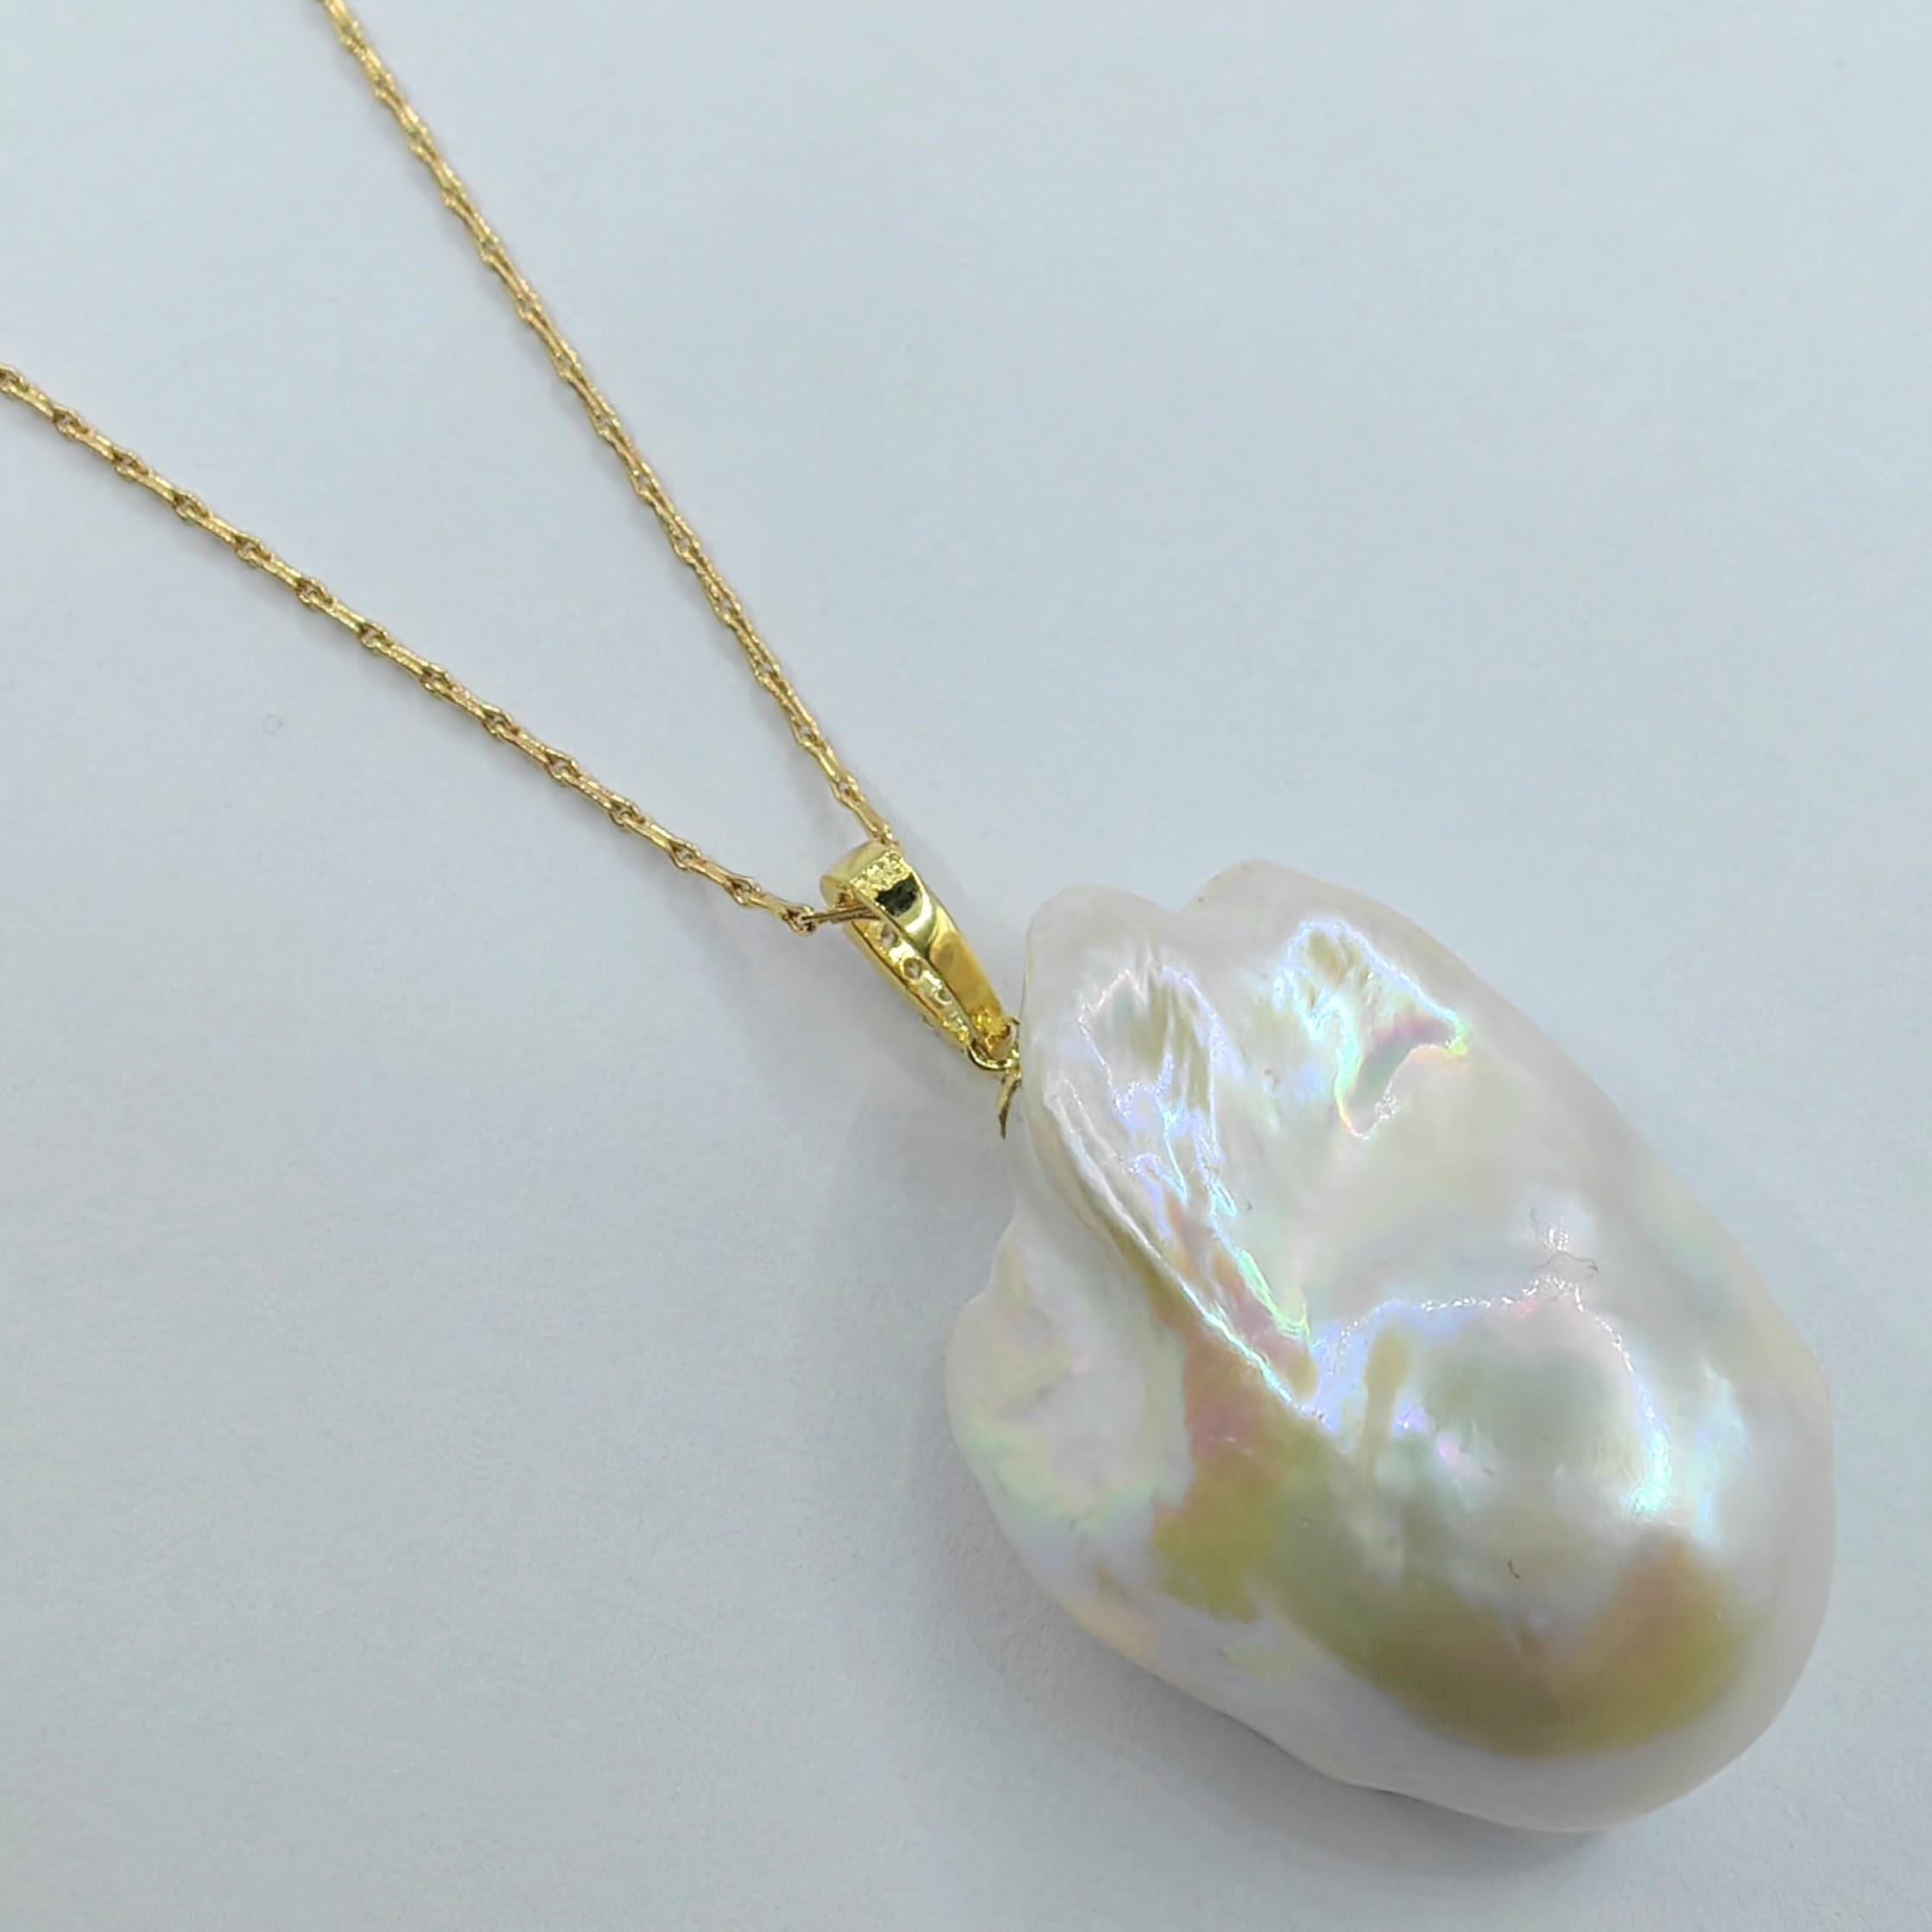 49.24ct Large Iridescent Baroque Pearl Diamond 18K Yellow Gold Necklace Pendant In New Condition For Sale In Wan Chai District, HK